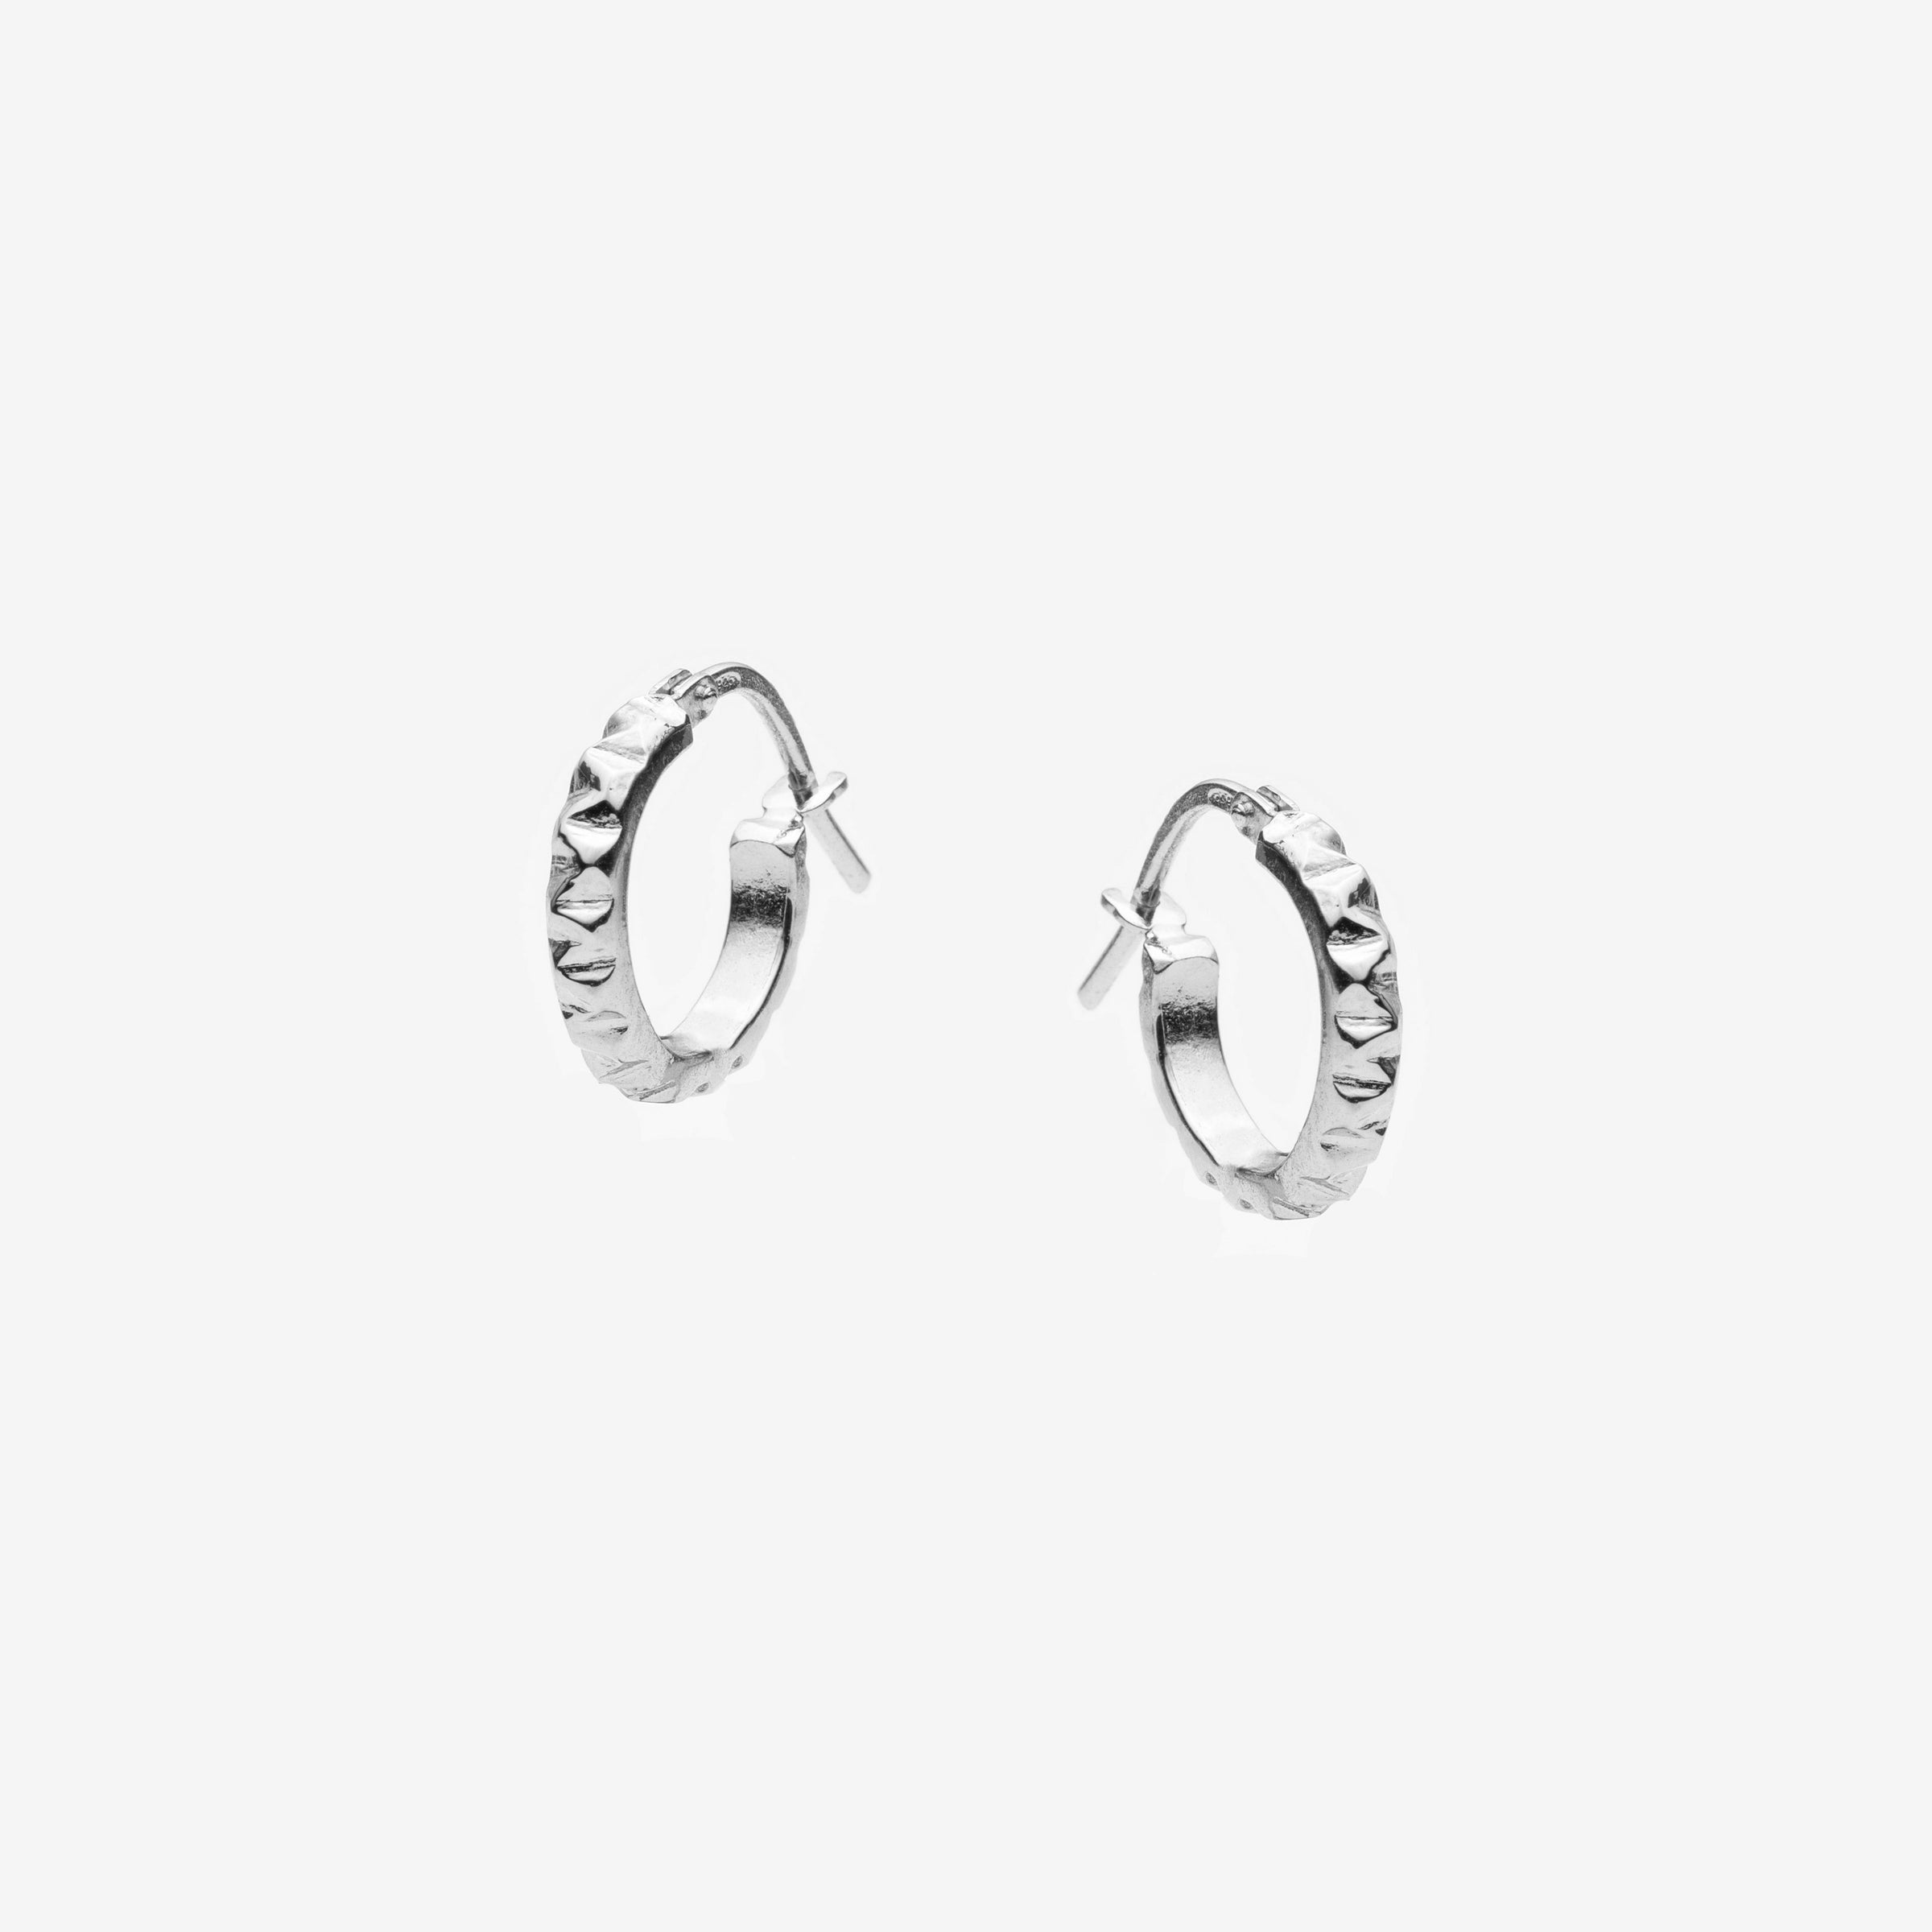 Sterling Silver Cable Medium Fashion Hoop Earrings 0.68